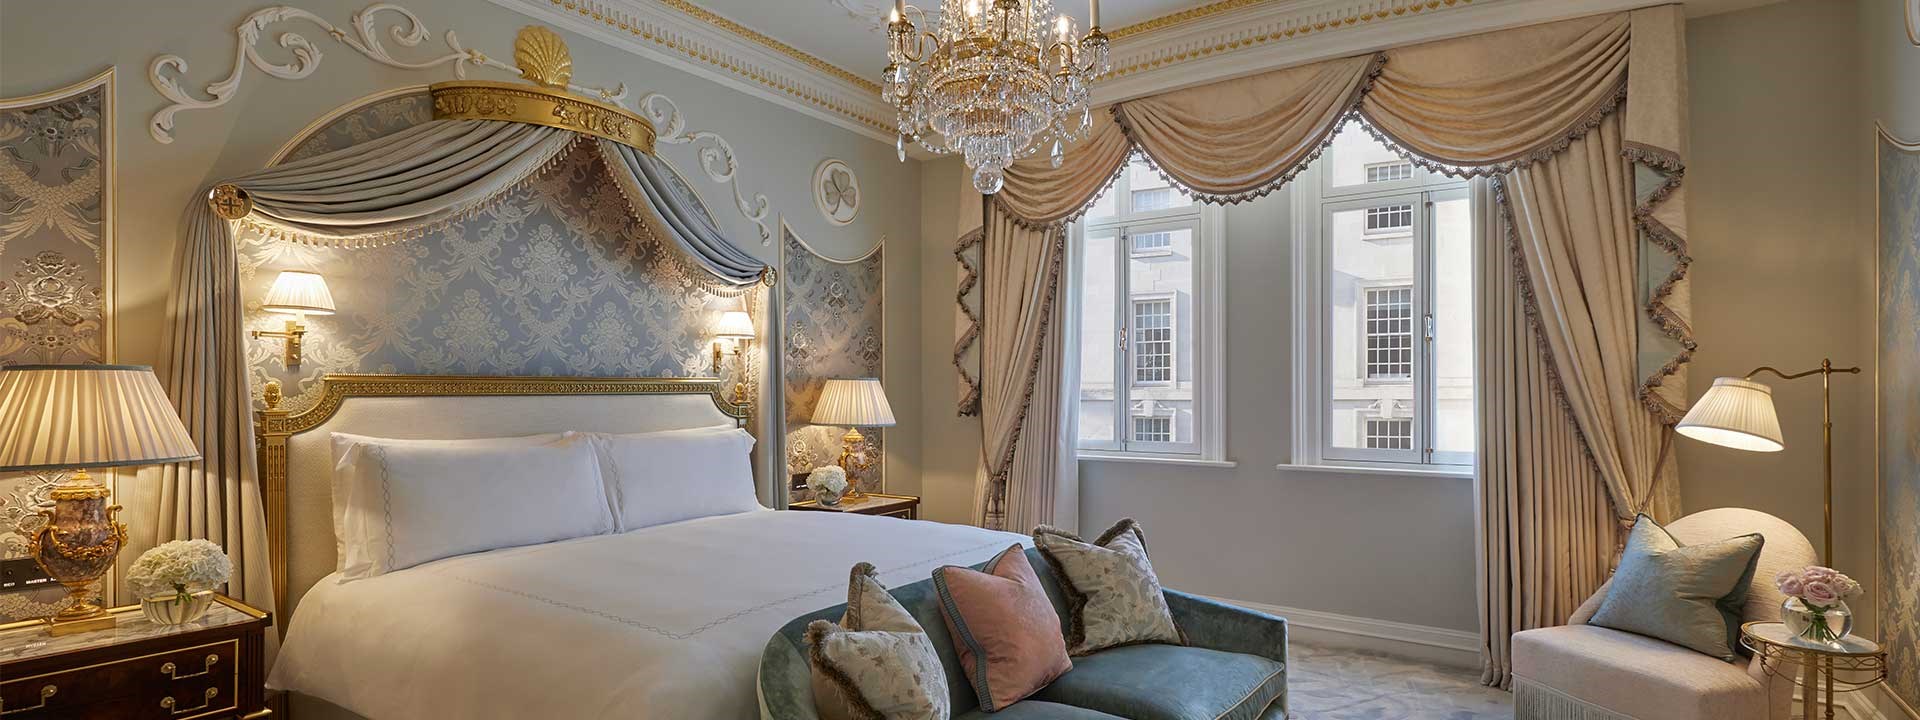 Royal Suite at Claridge's - bedroom with bed, bedside table and sofa next to the bed.